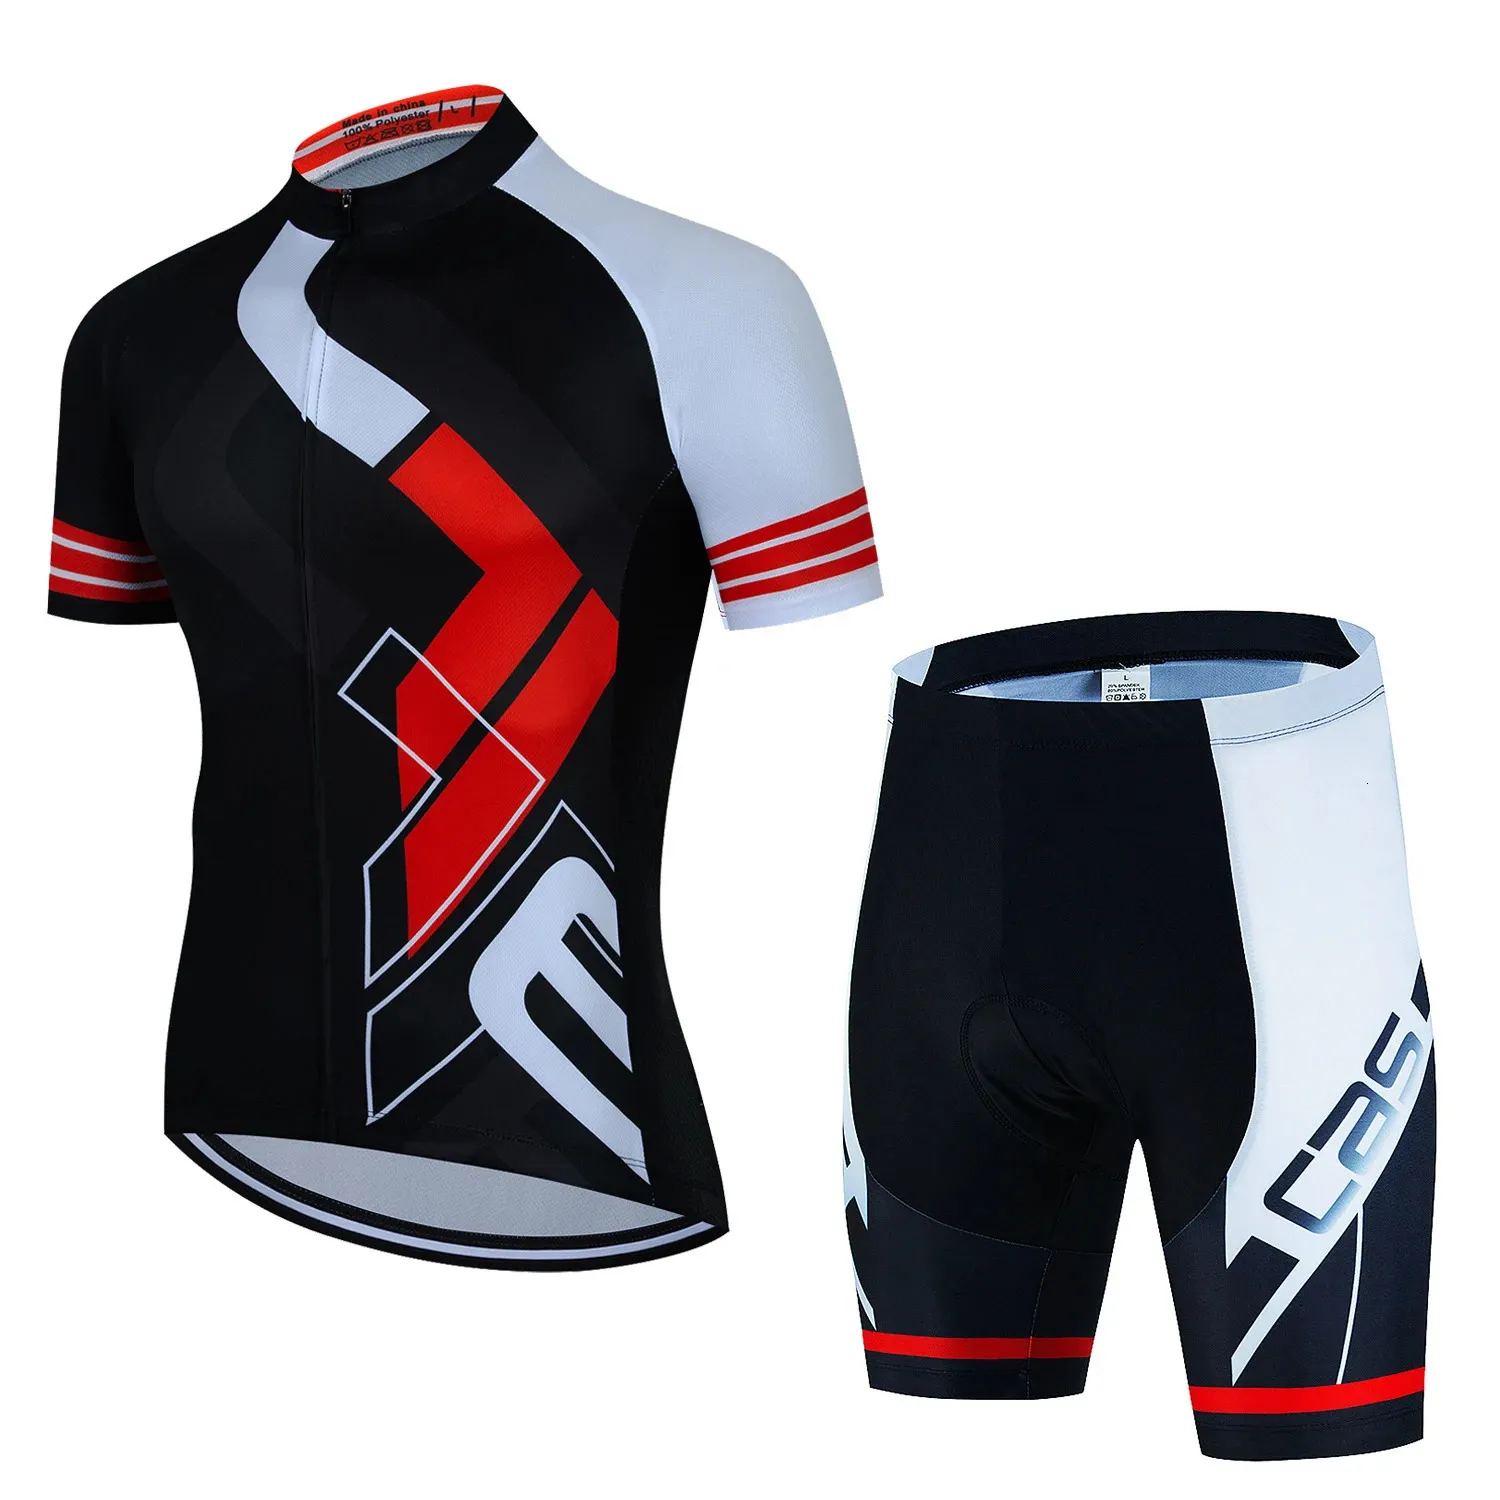 Pro Team Cycling Jersey Set Summer Clothing MTB Bike Design Uniform Maillot Ropa Ciclismo Man Bicycle Suit 240416